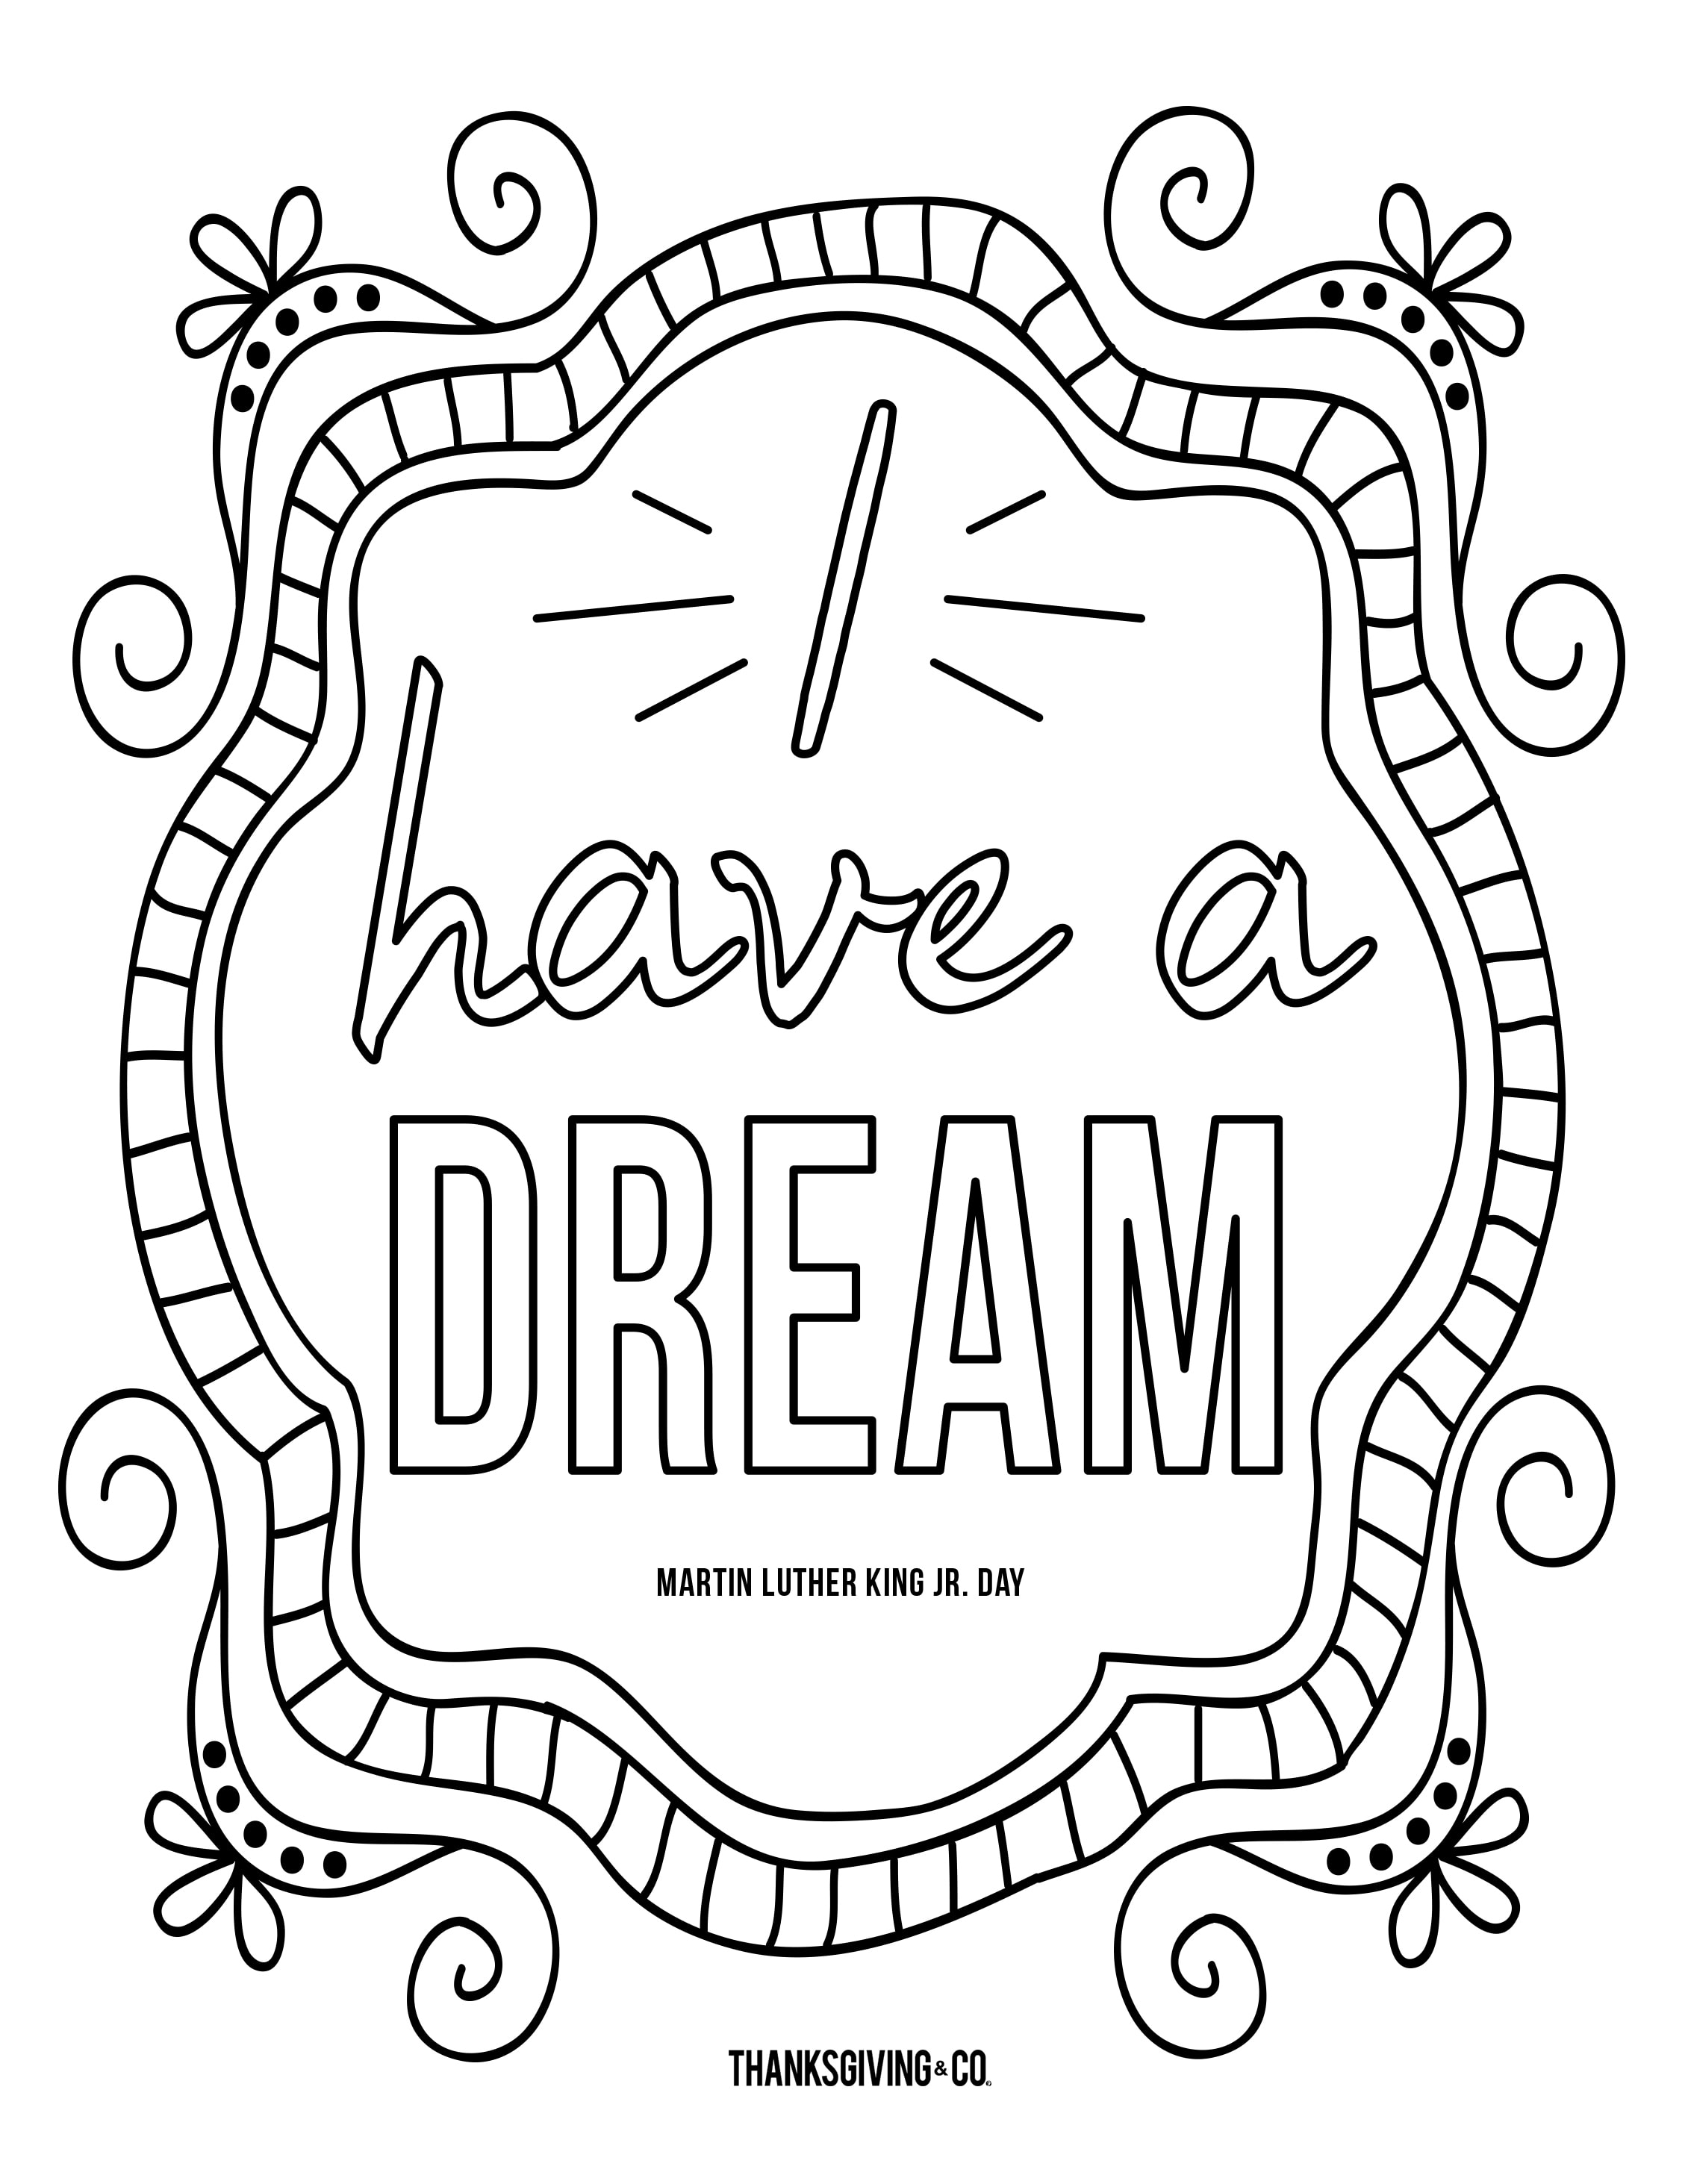 Martin Luther King Day Coloring Sheet Free